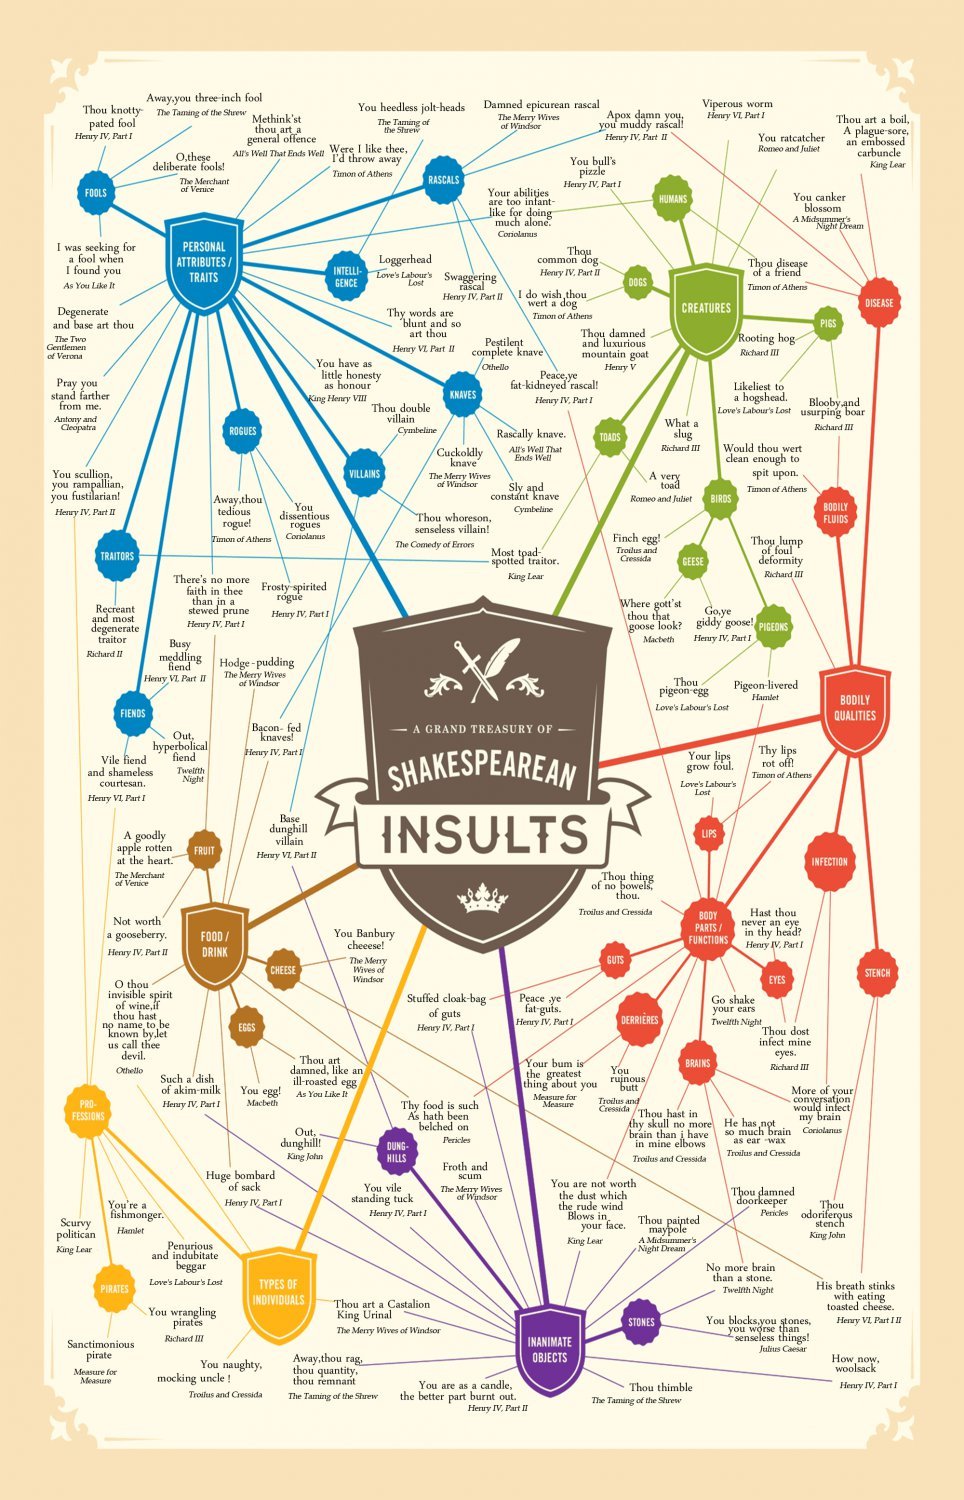 Shakespearean Insults Chart 18x28 inches Poster Print